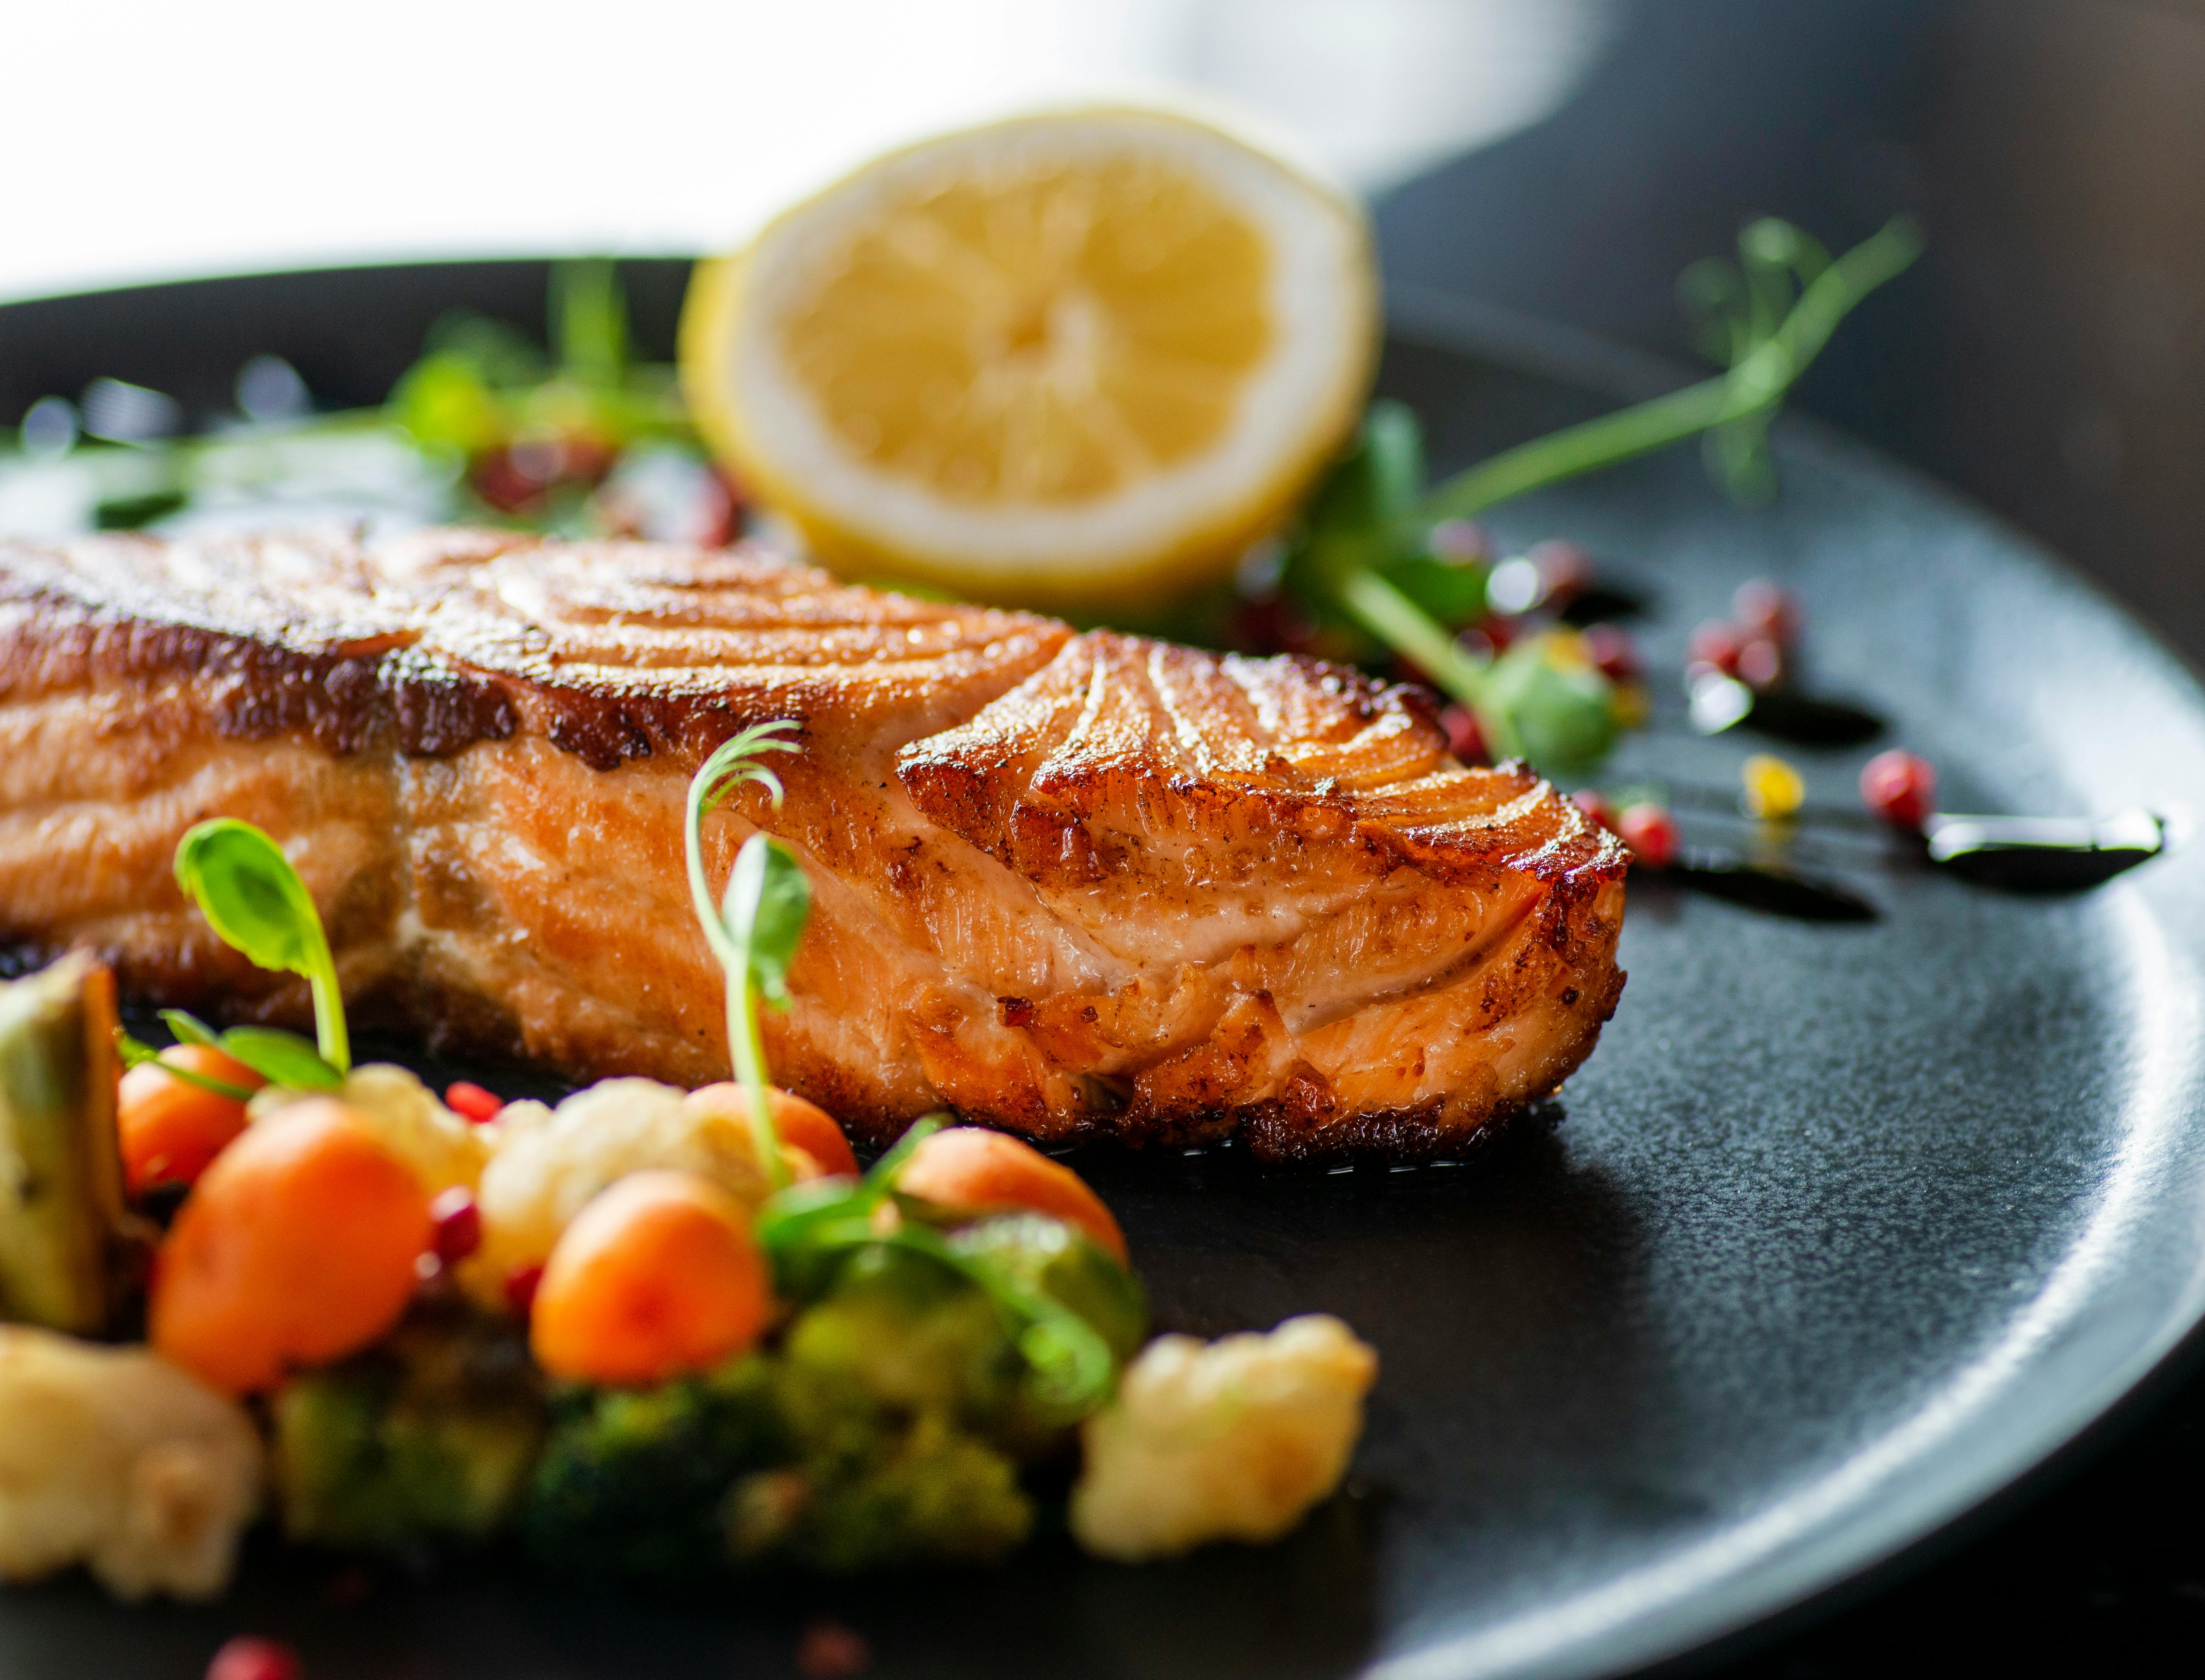 Super Delicious & Gluten-Free Meal Guide, Recipe Post #362:

Grilled Salmon with Peach Salsa